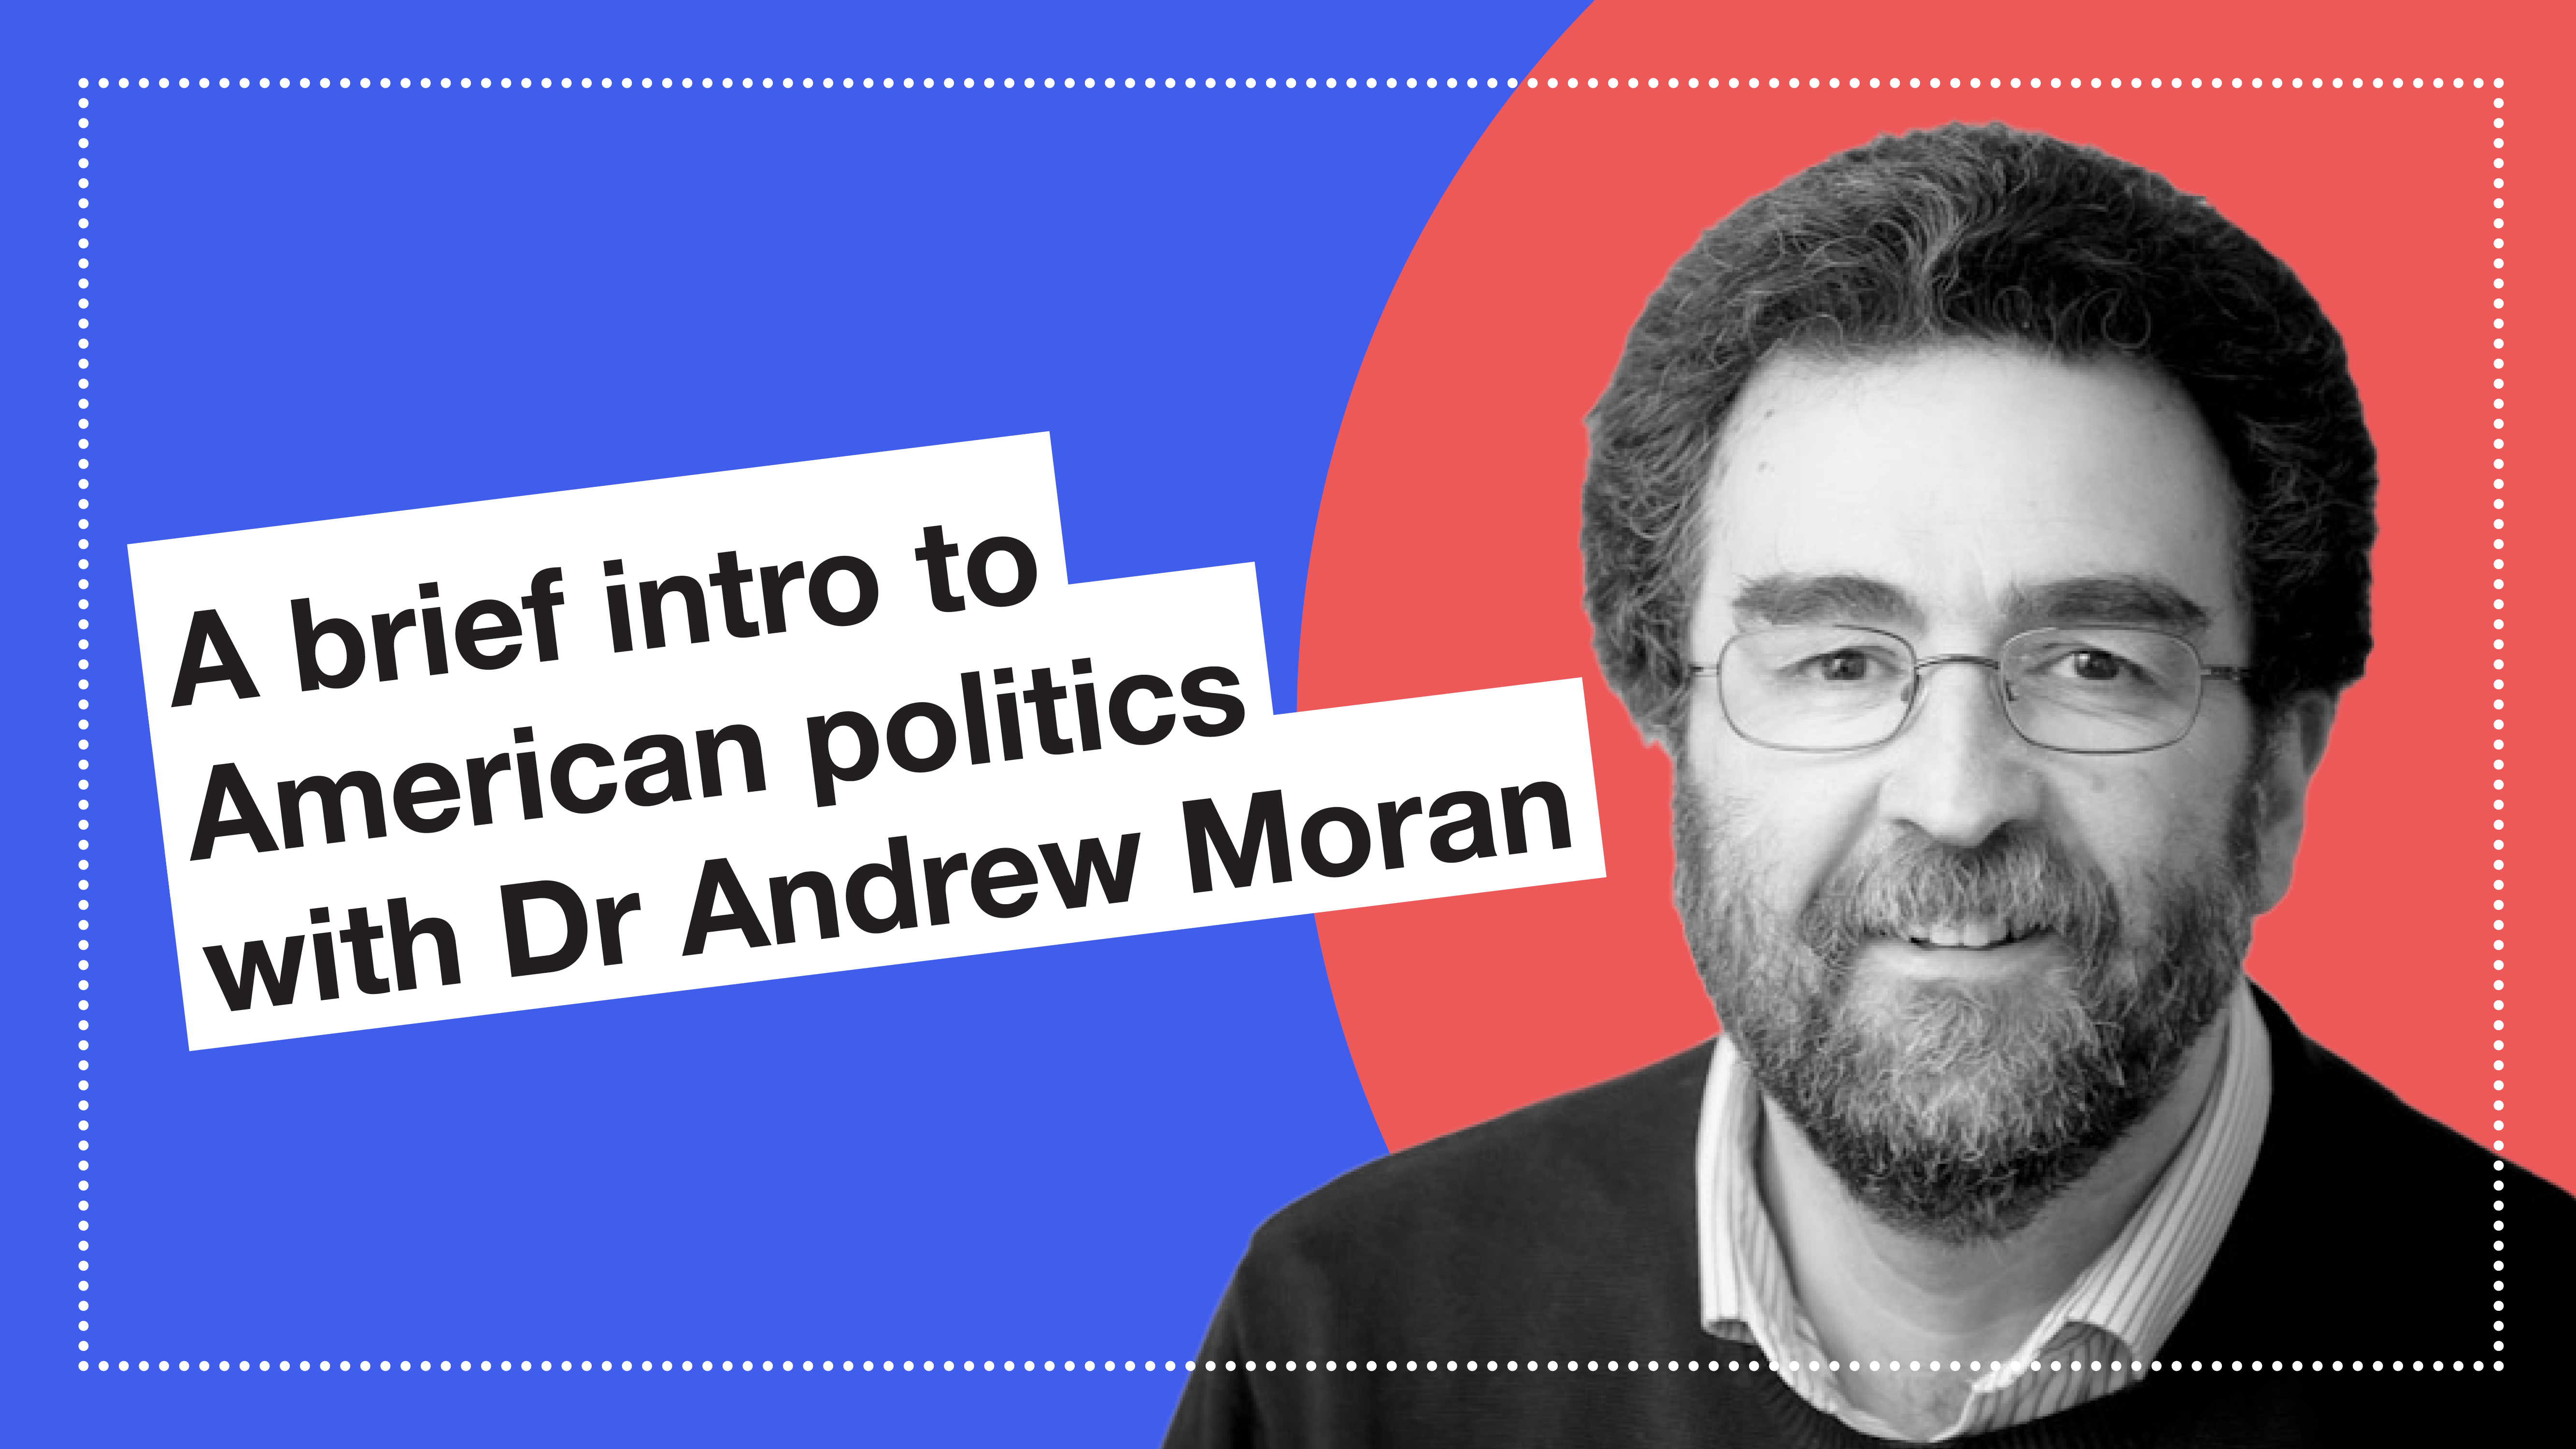 A brief intro to American politics with Dr Andrew Moran